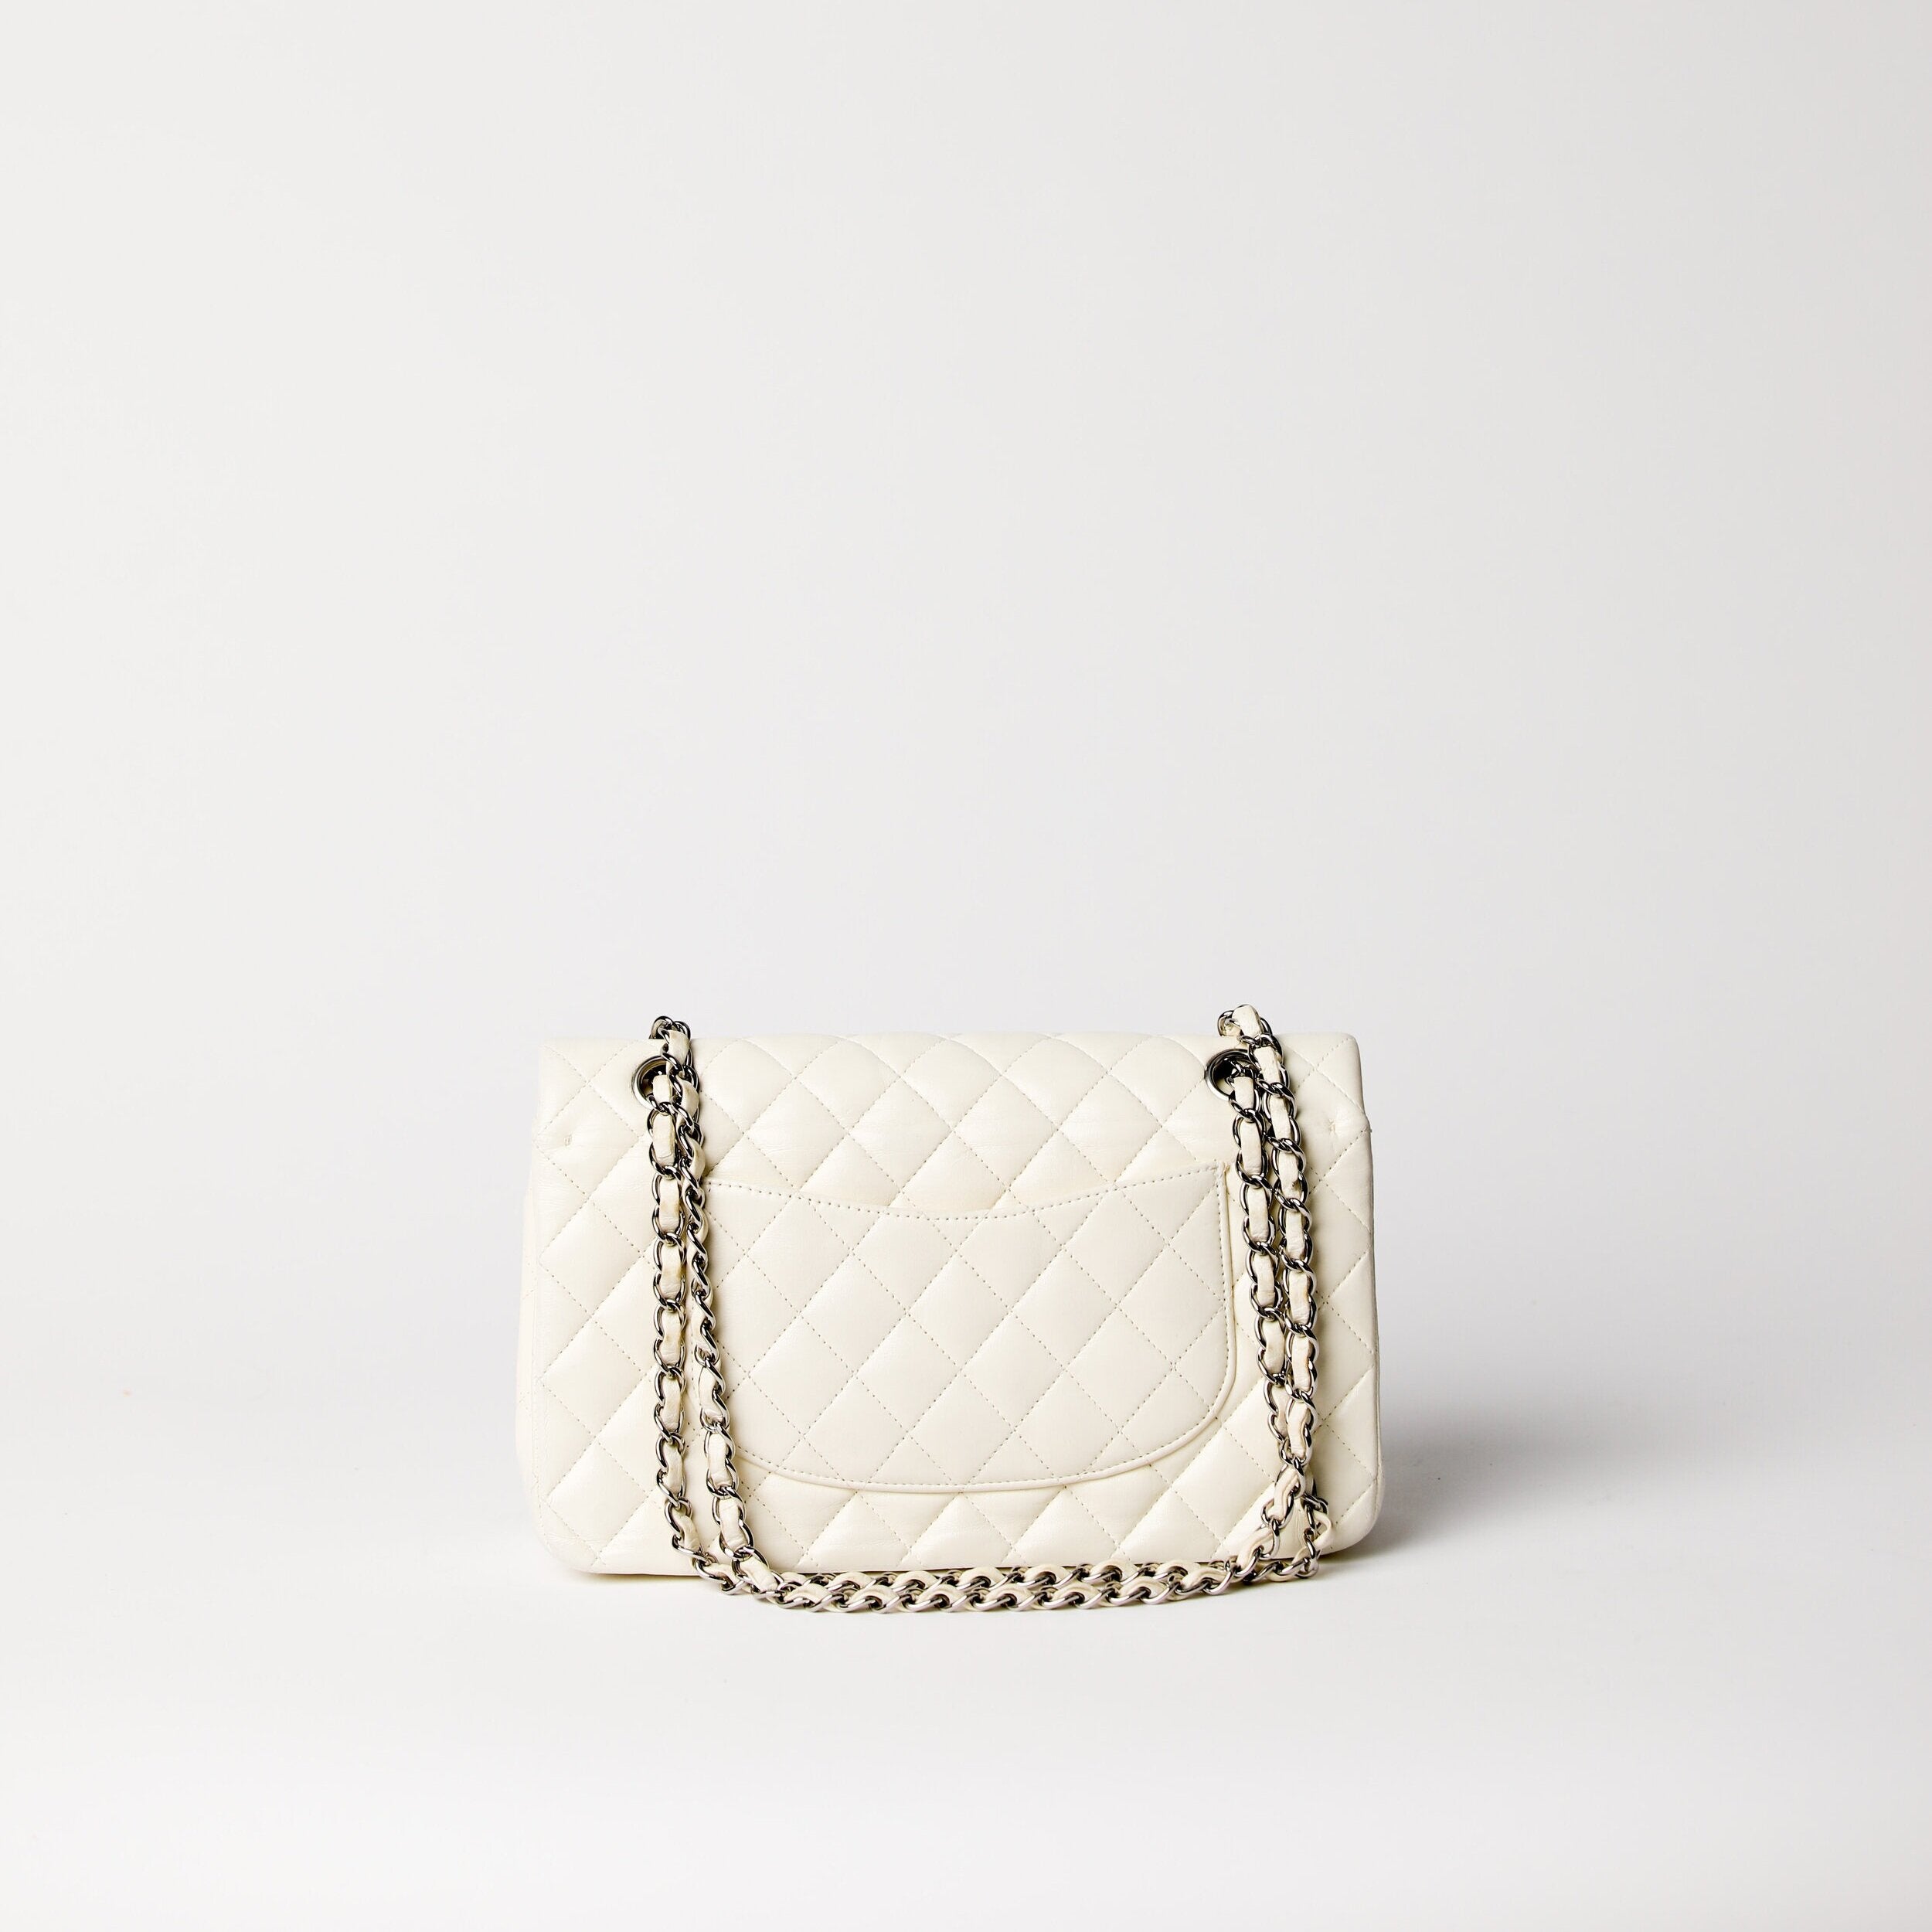 Chanel White Lambskin Double Sided Classic Flap Bag Vintage